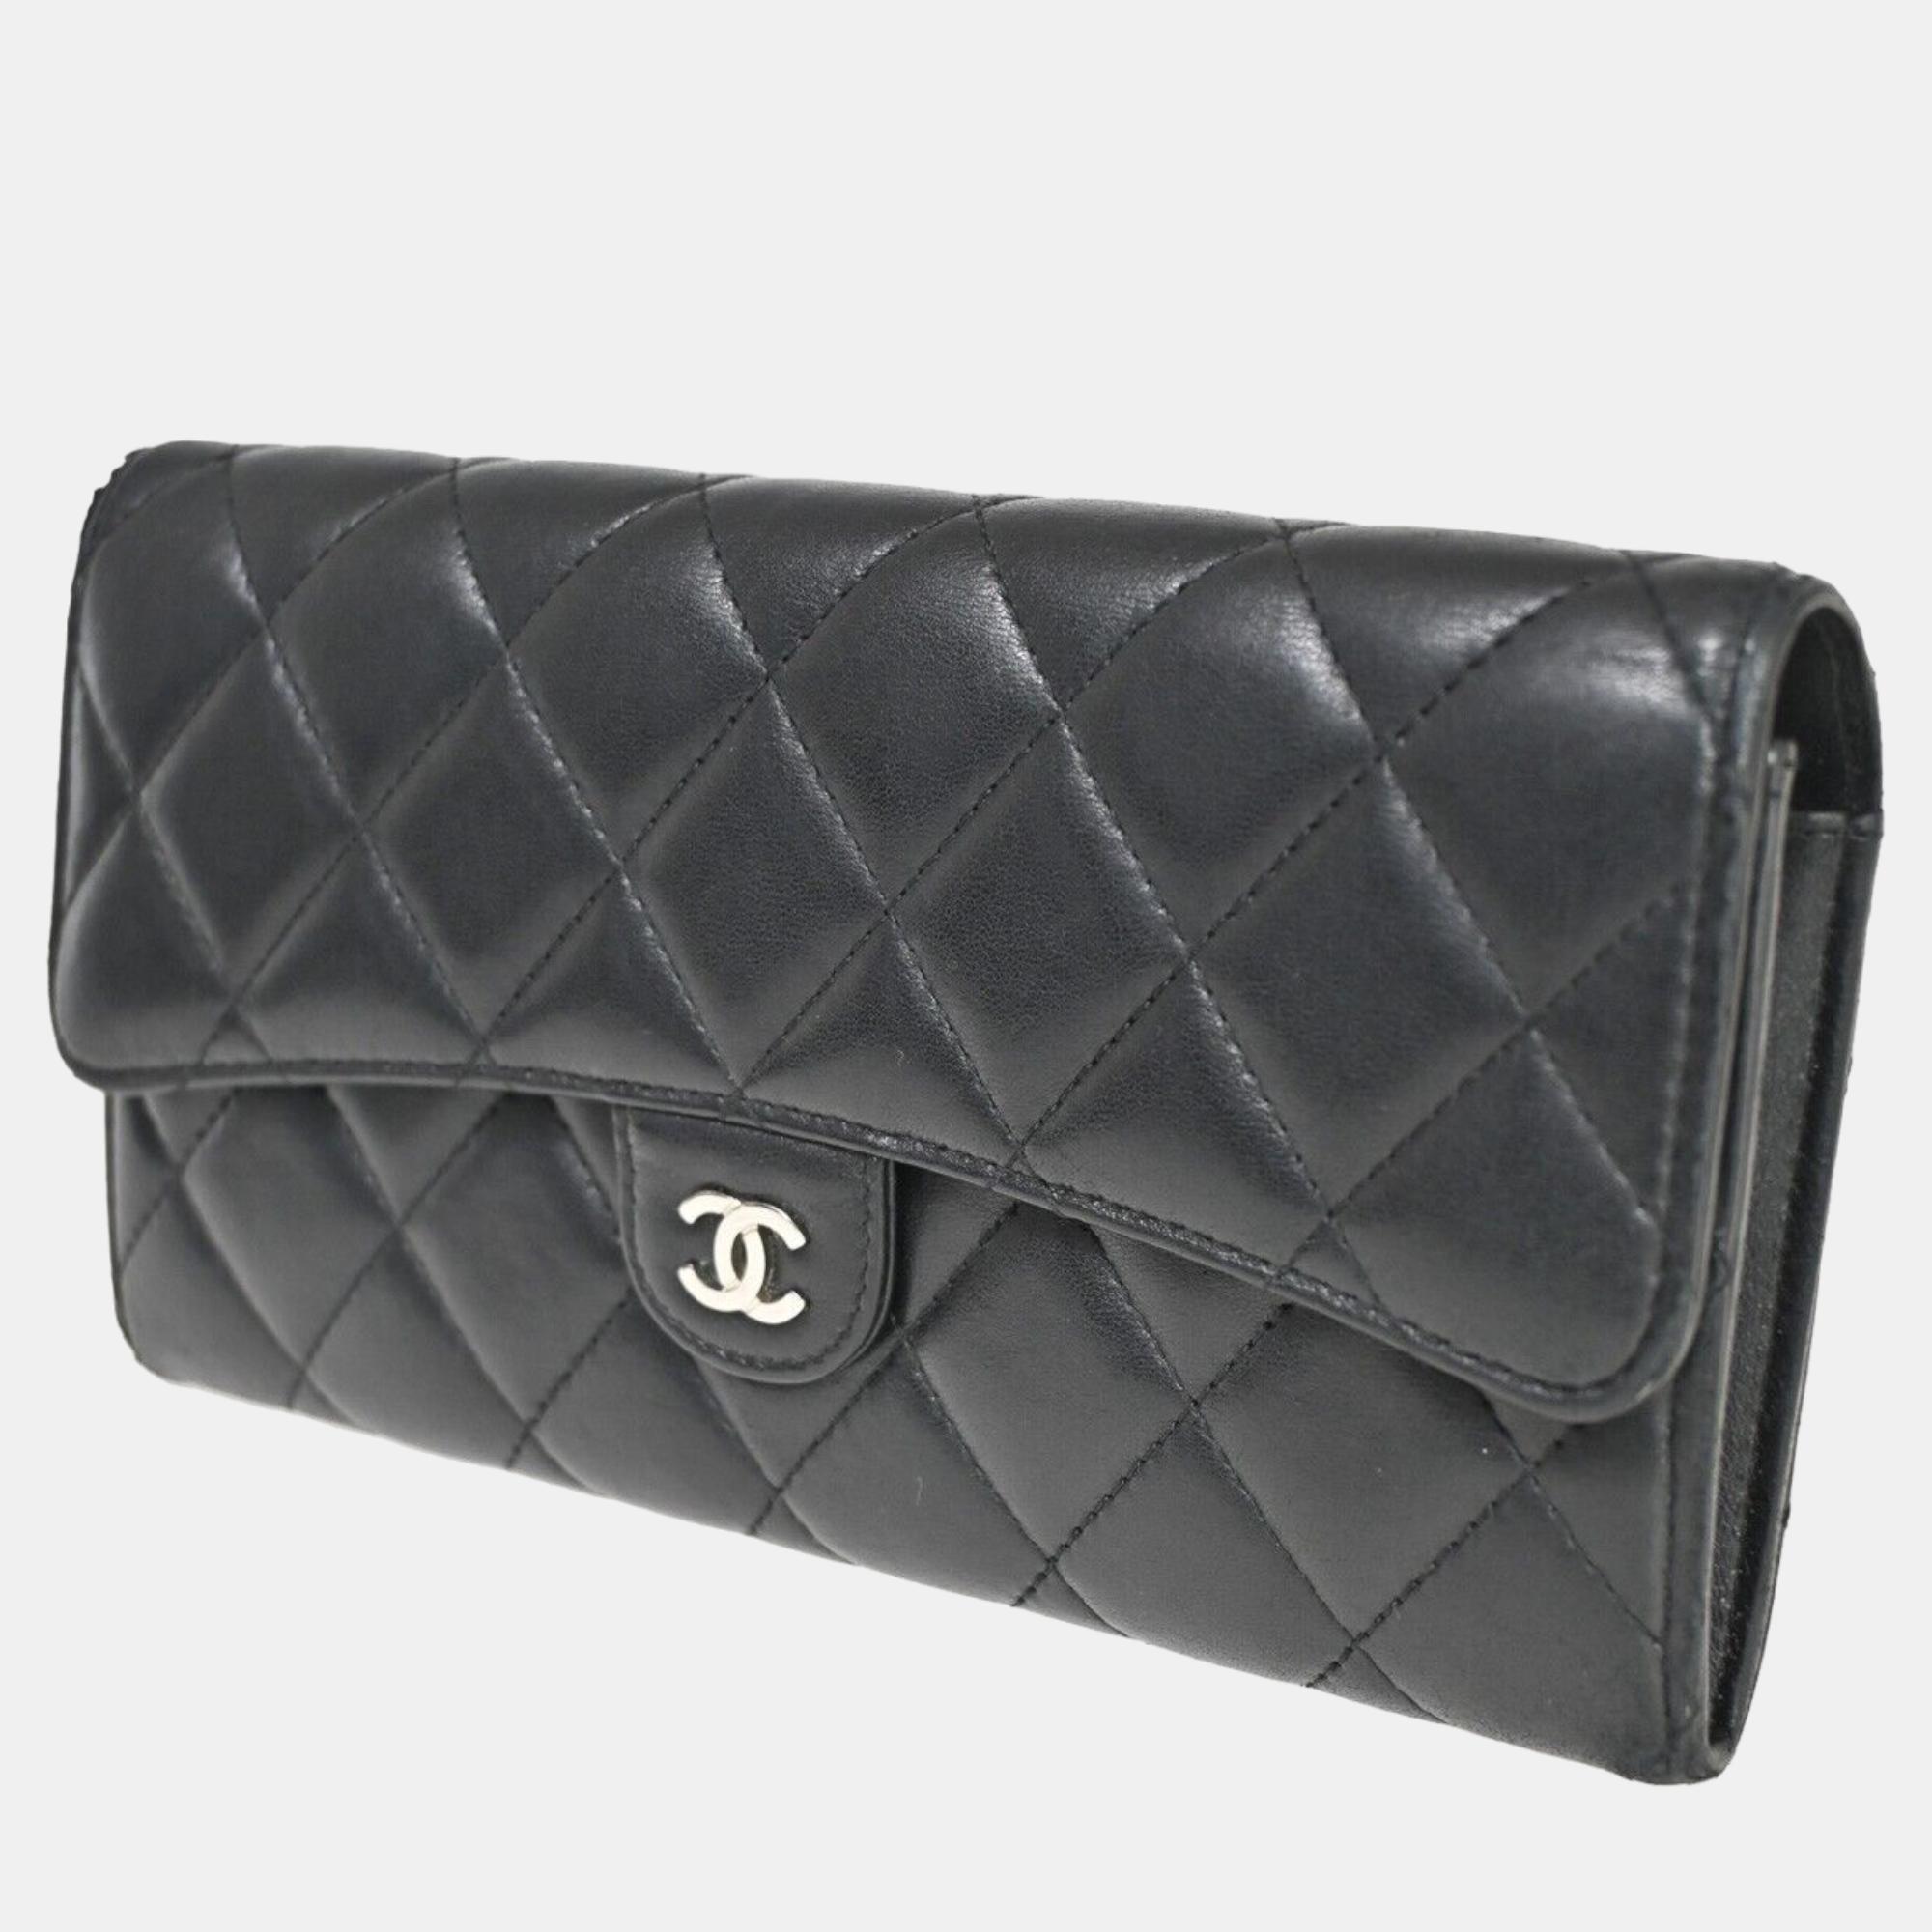 Chanel black leather classic flap wallet accessories